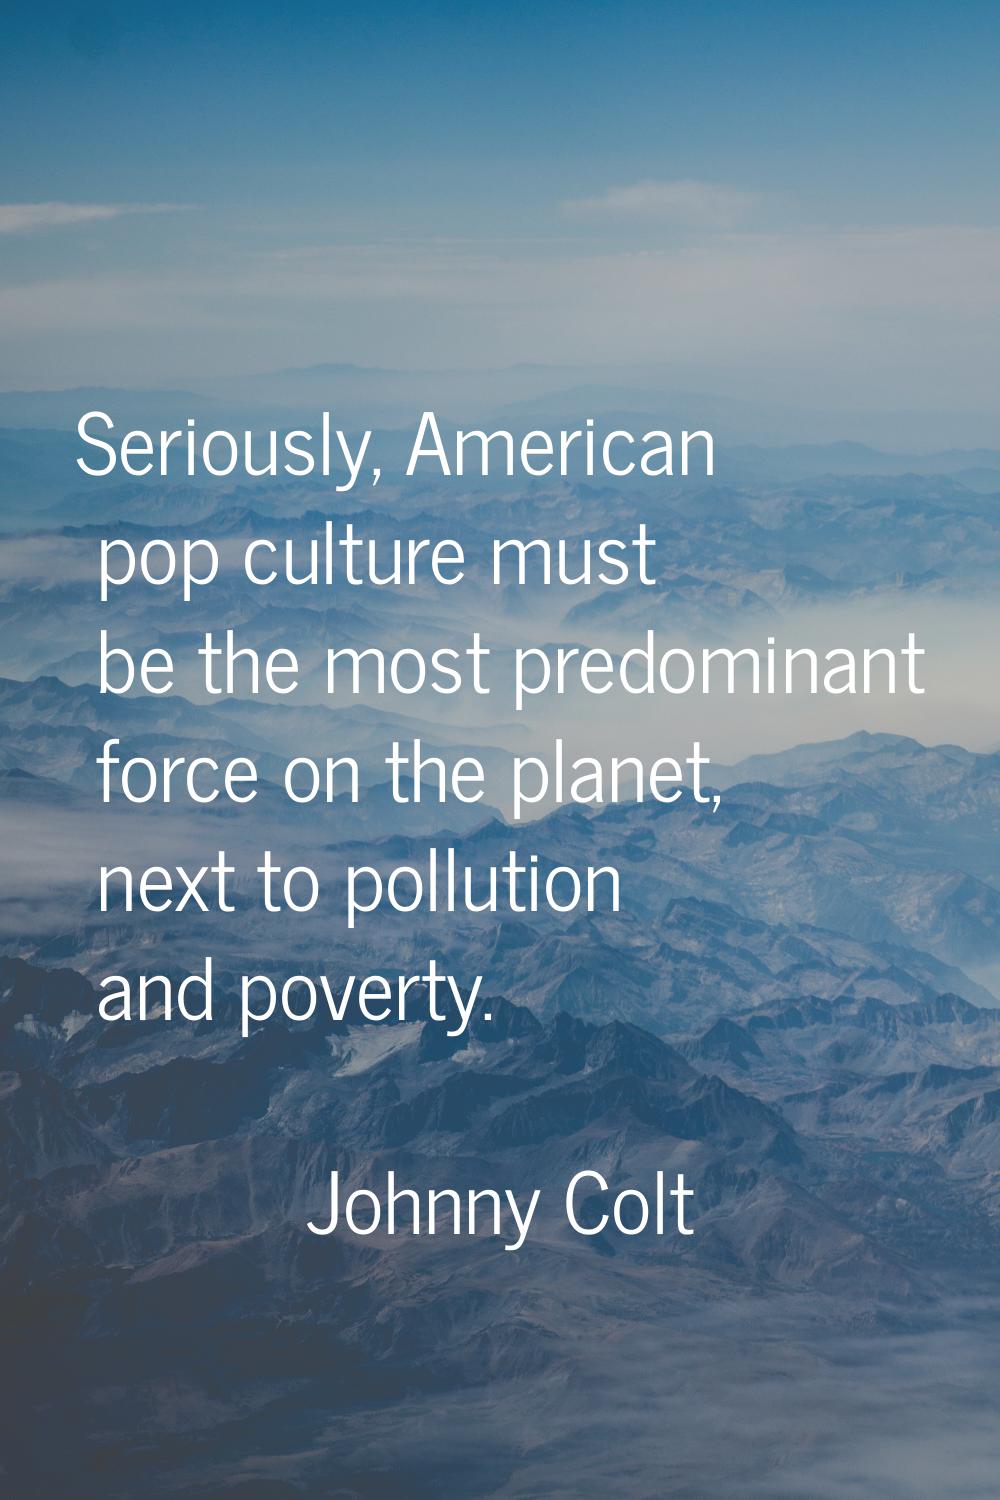 Seriously, American pop culture must be the most predominant force on the planet, next to pollution